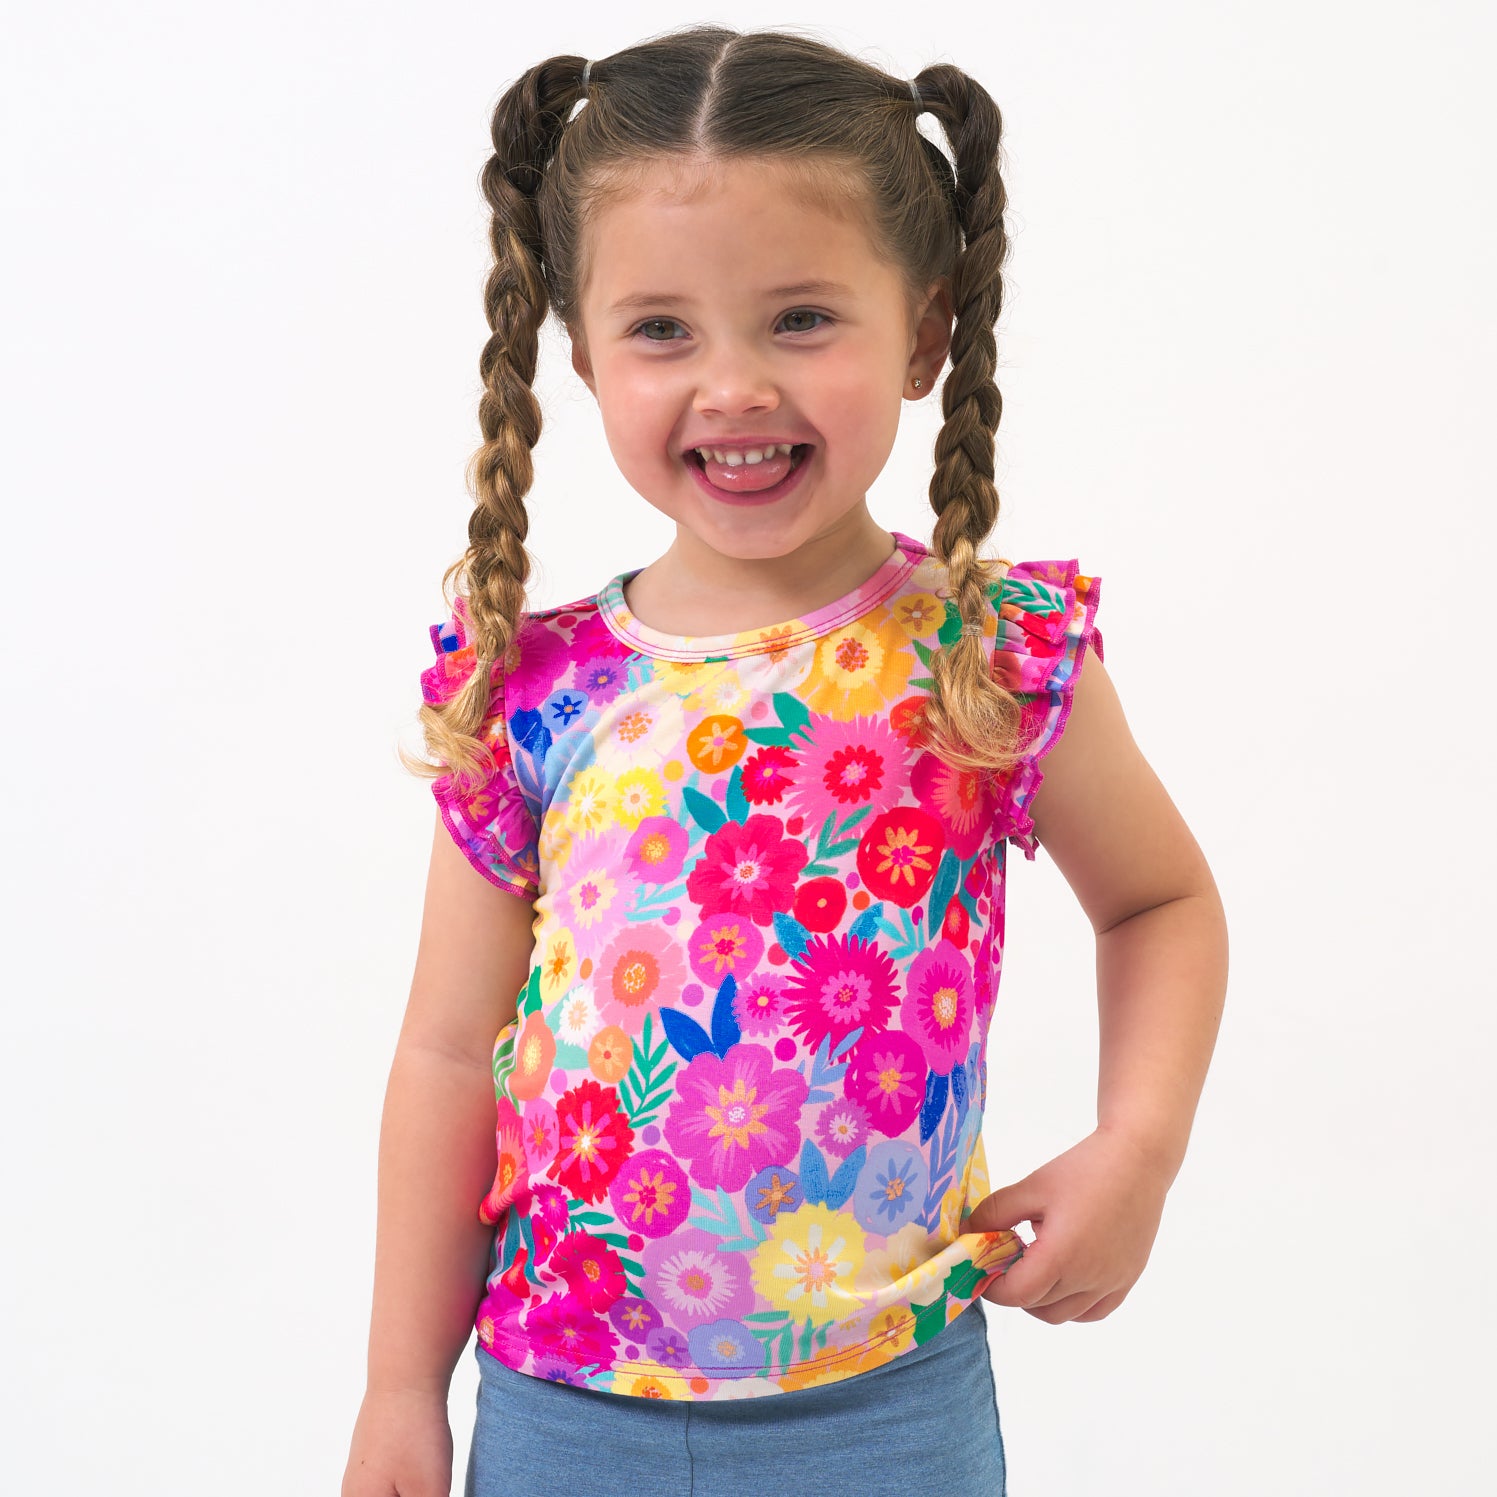 Child wearing a Rainbow Blooms flutter tee and coordinating shorts